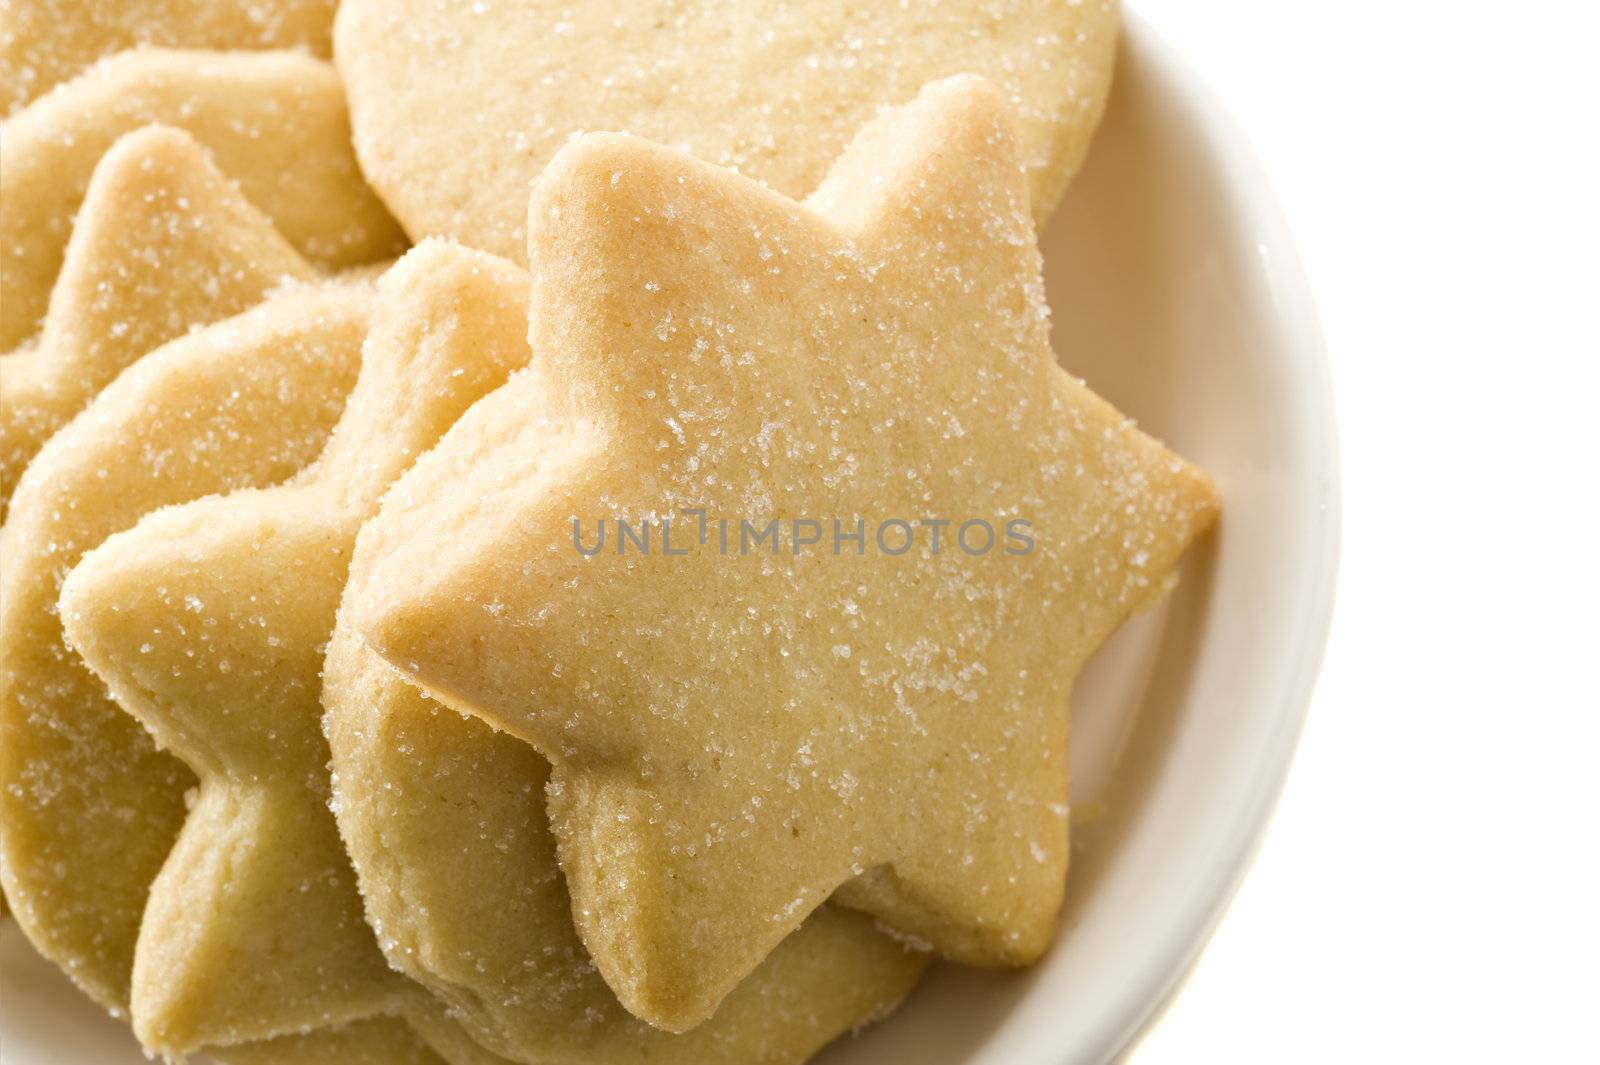 Star shaped homemade cookies in a white plate by tish1